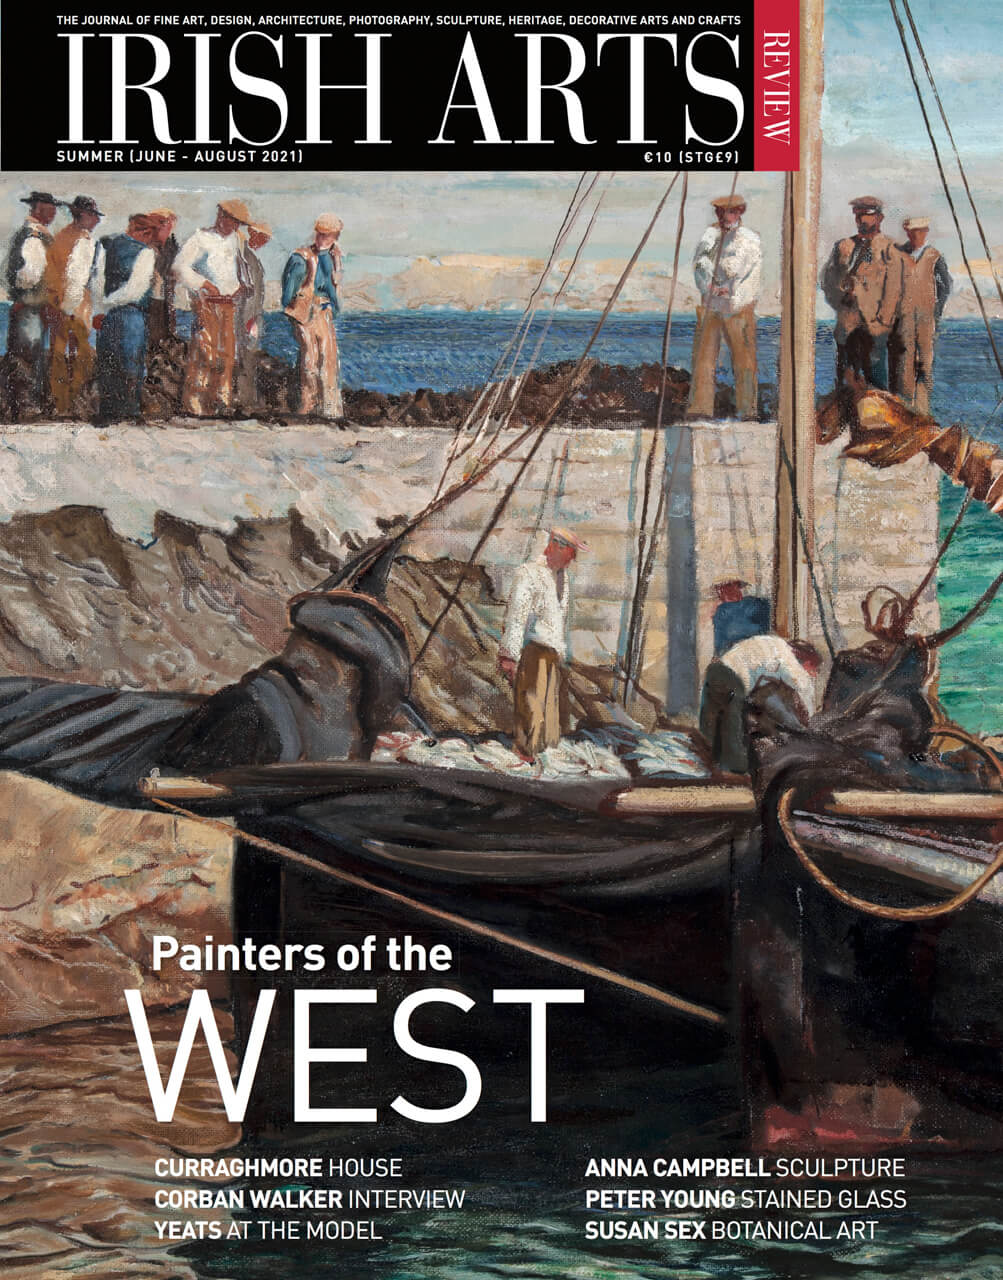 Painters of the West